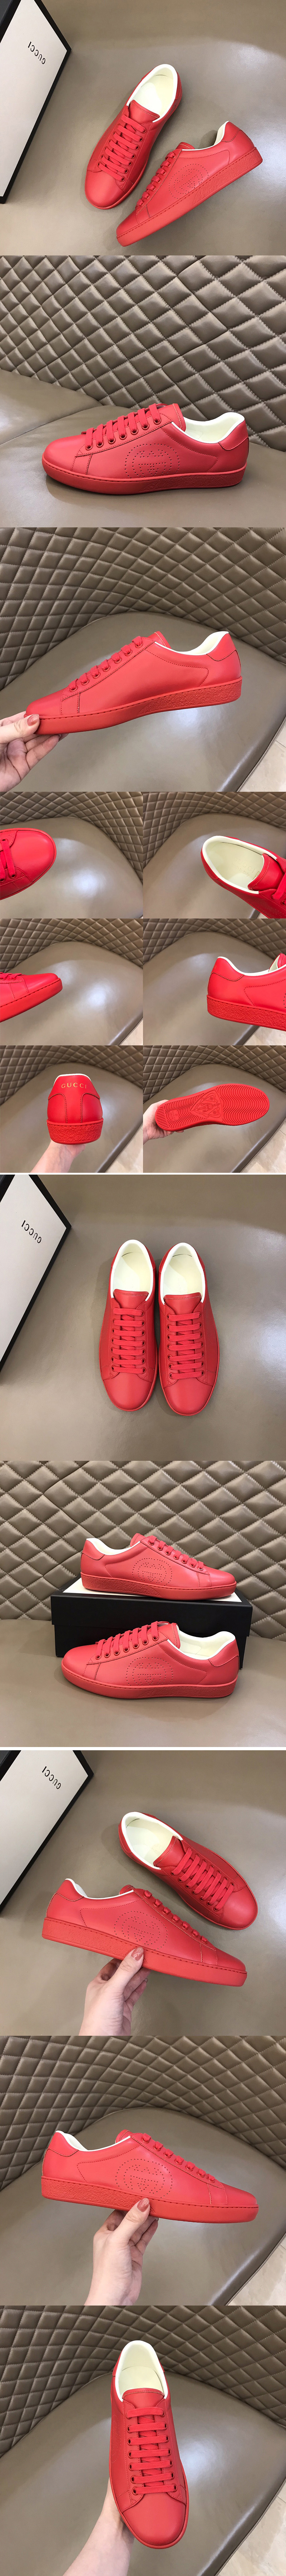 Replica Gucci 599147 Men's Ace sneaker with Interlocking G in Hibiscus red leather